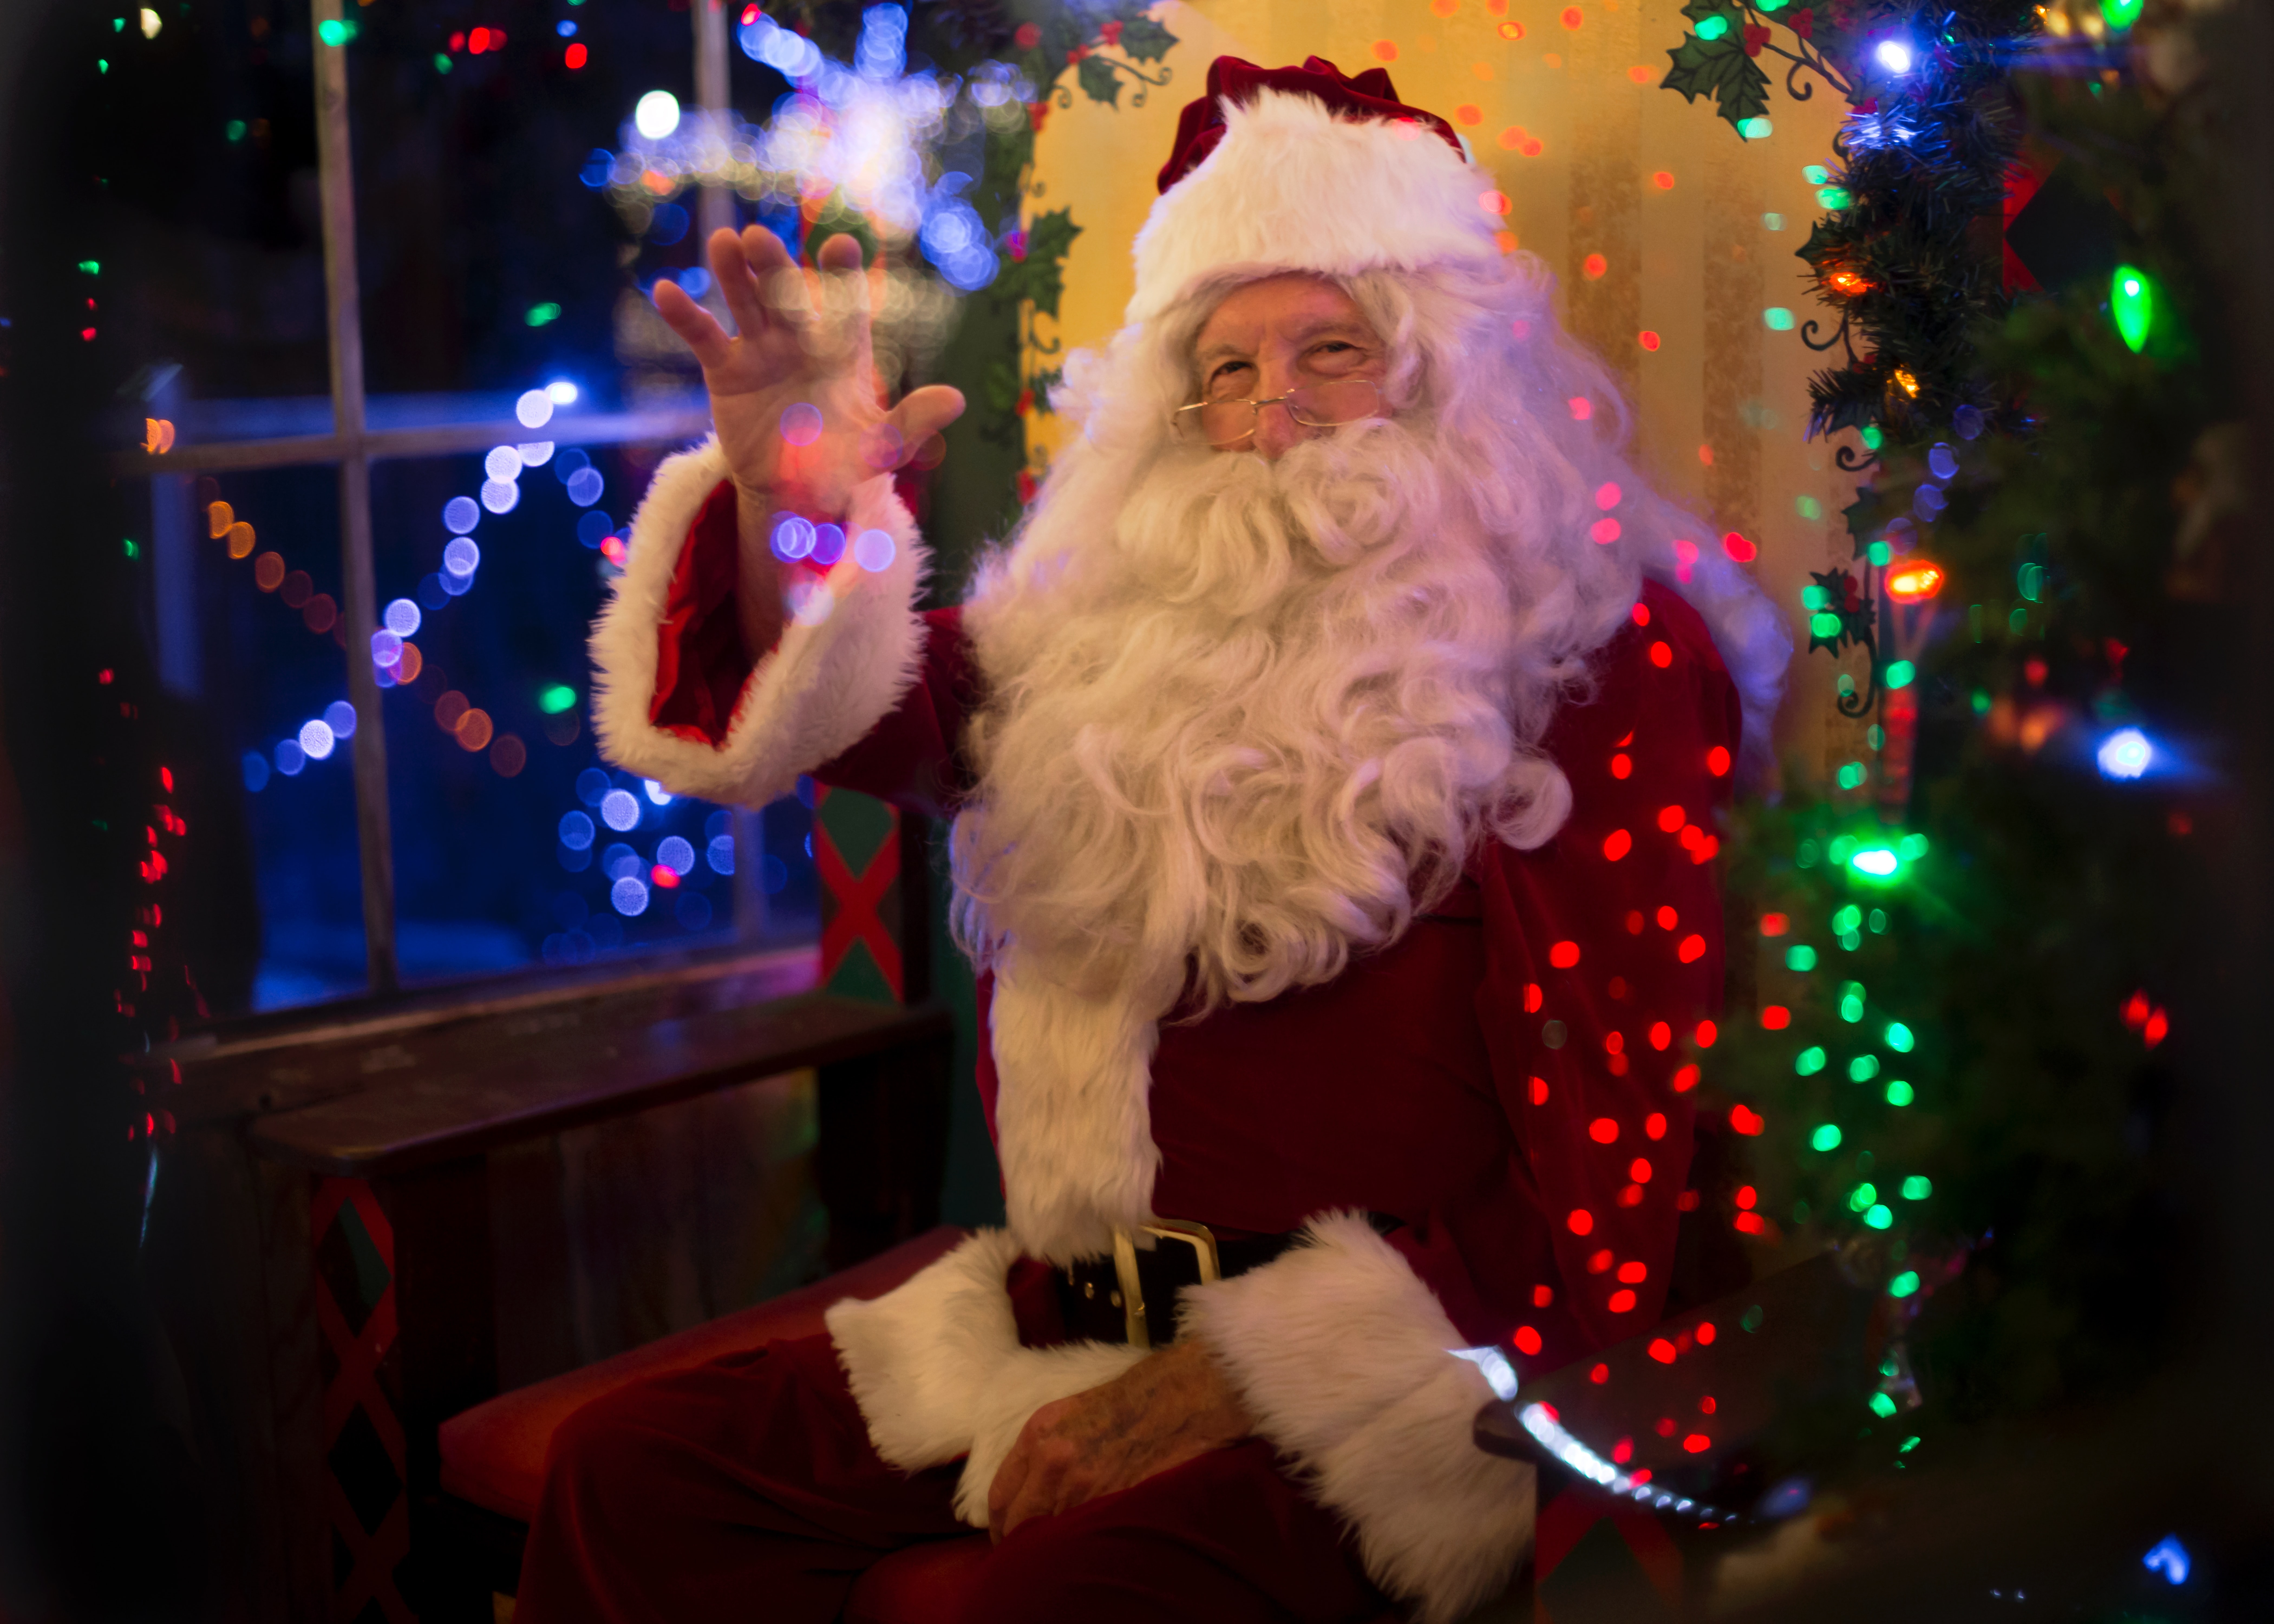 Is Father Christmas Real? The Power of Storytelling